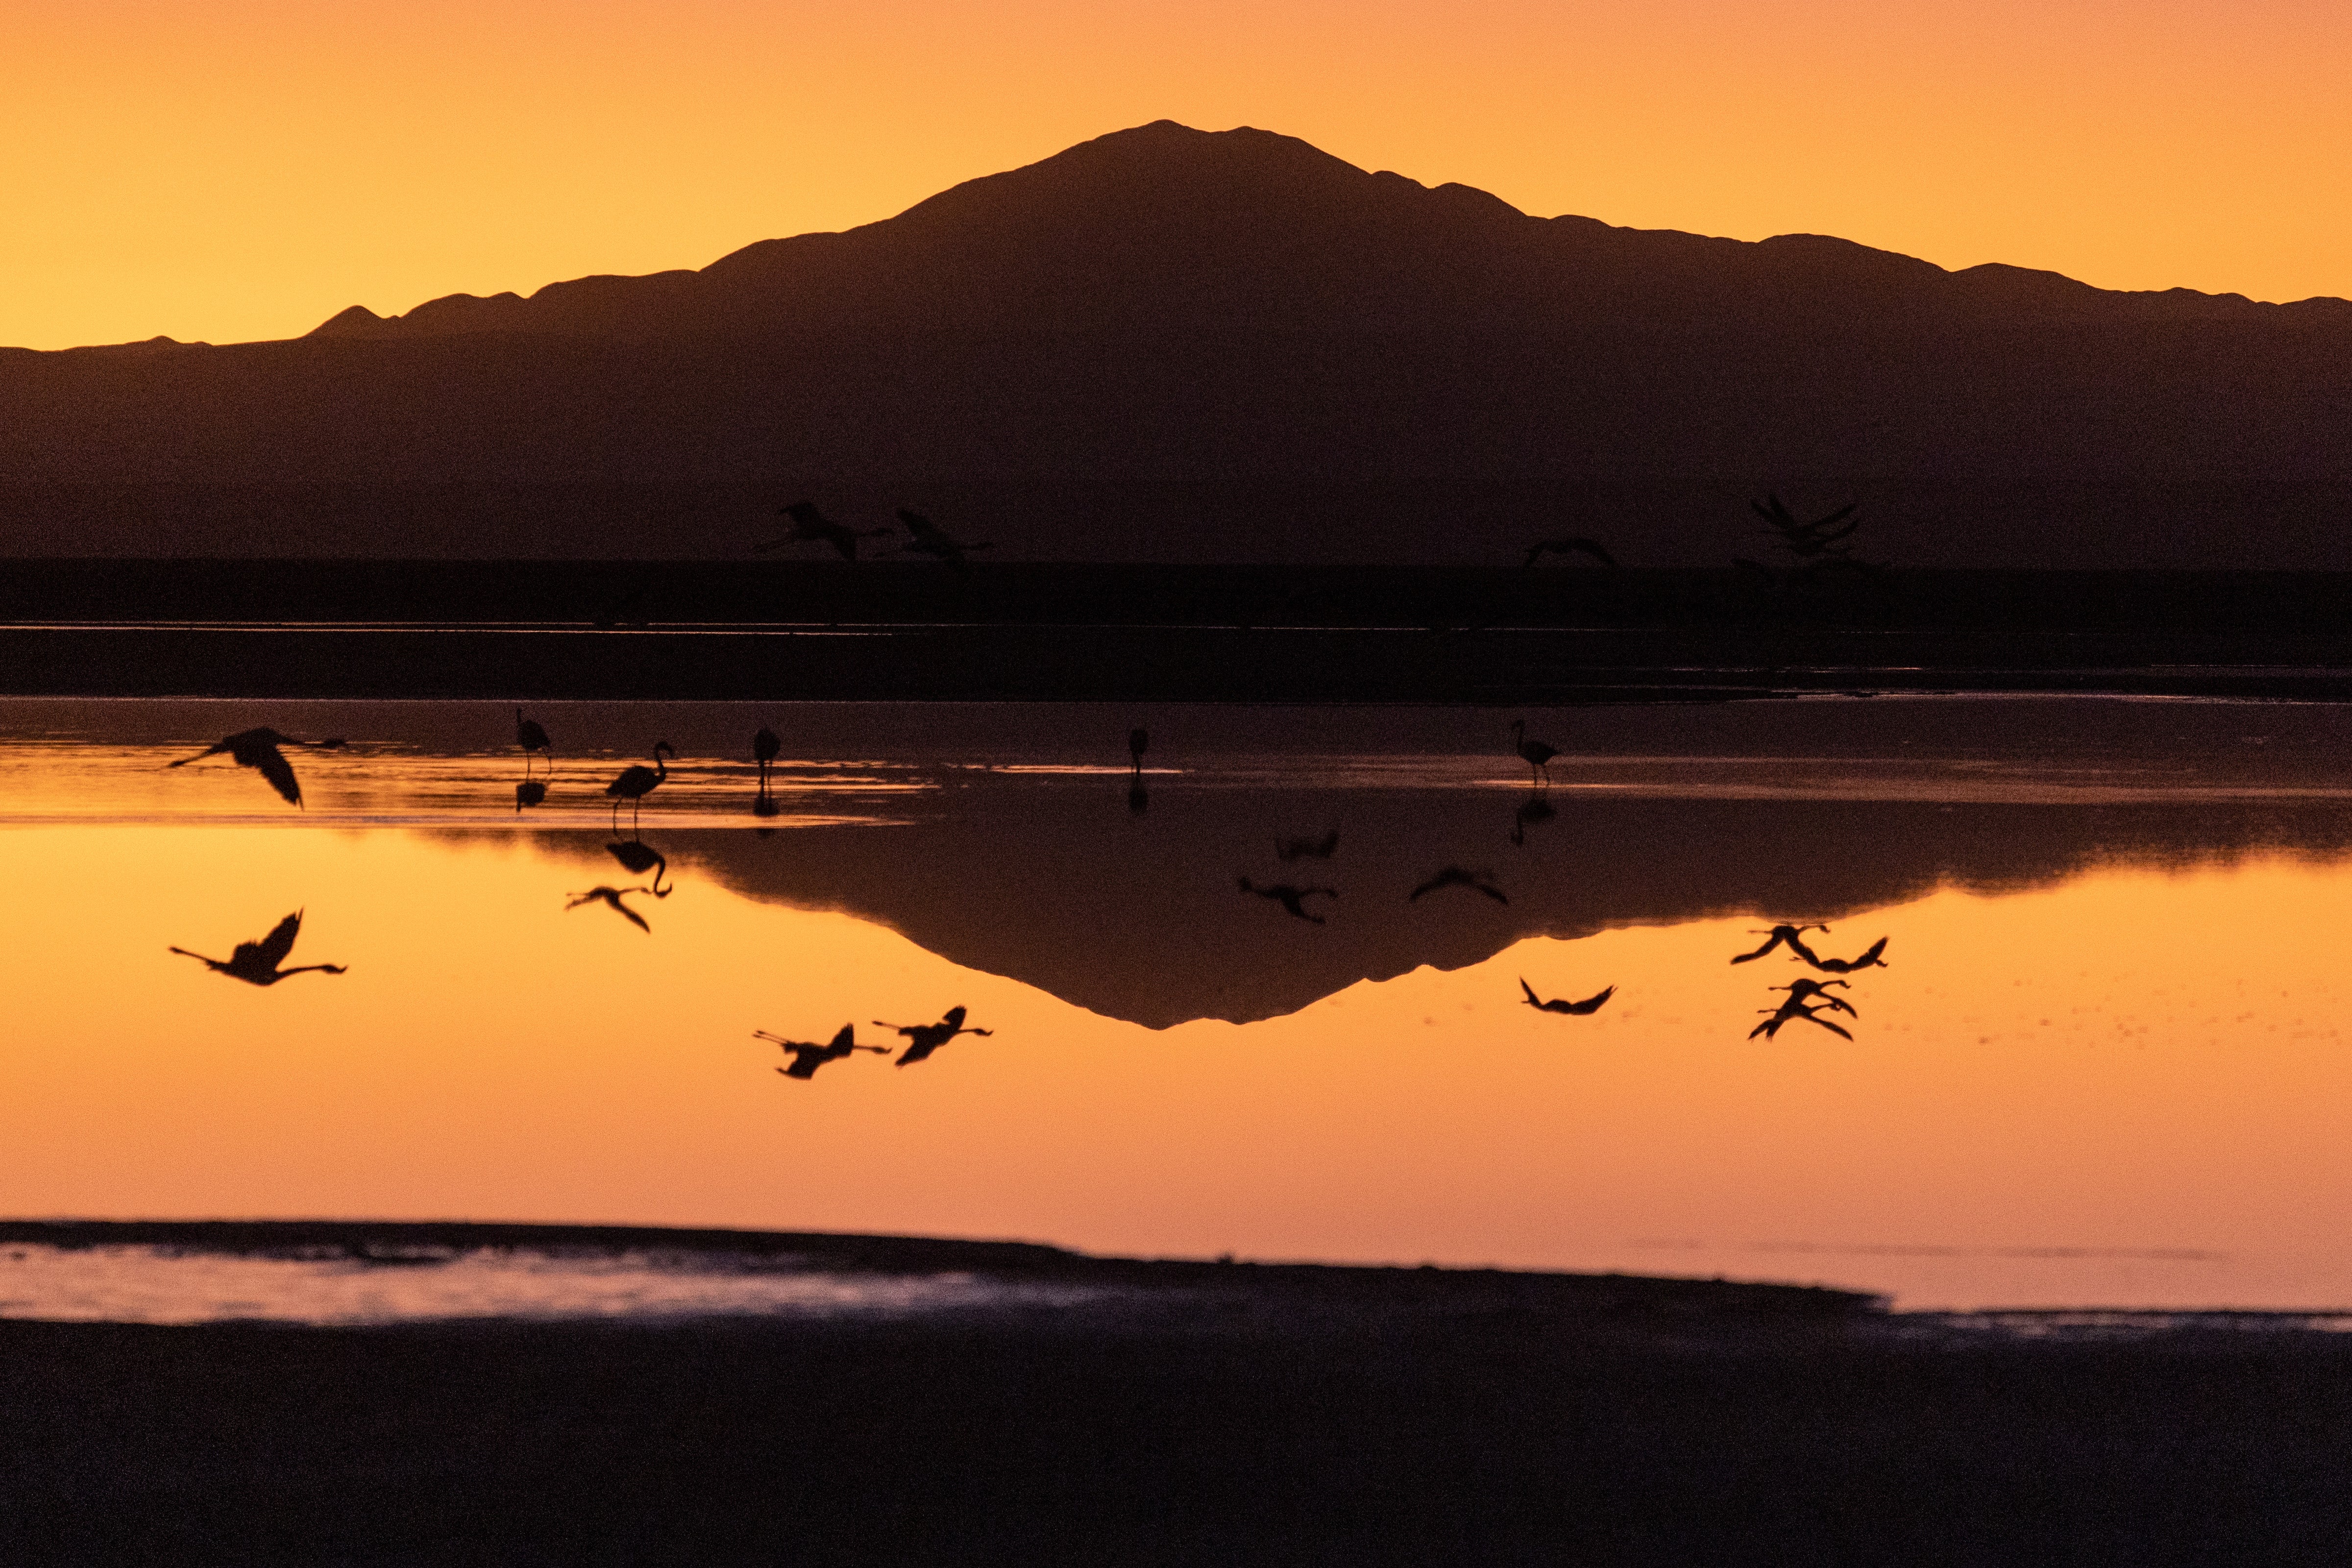 Flamingos fly over the brine lake. (Photo: John Moore, Getty Images)